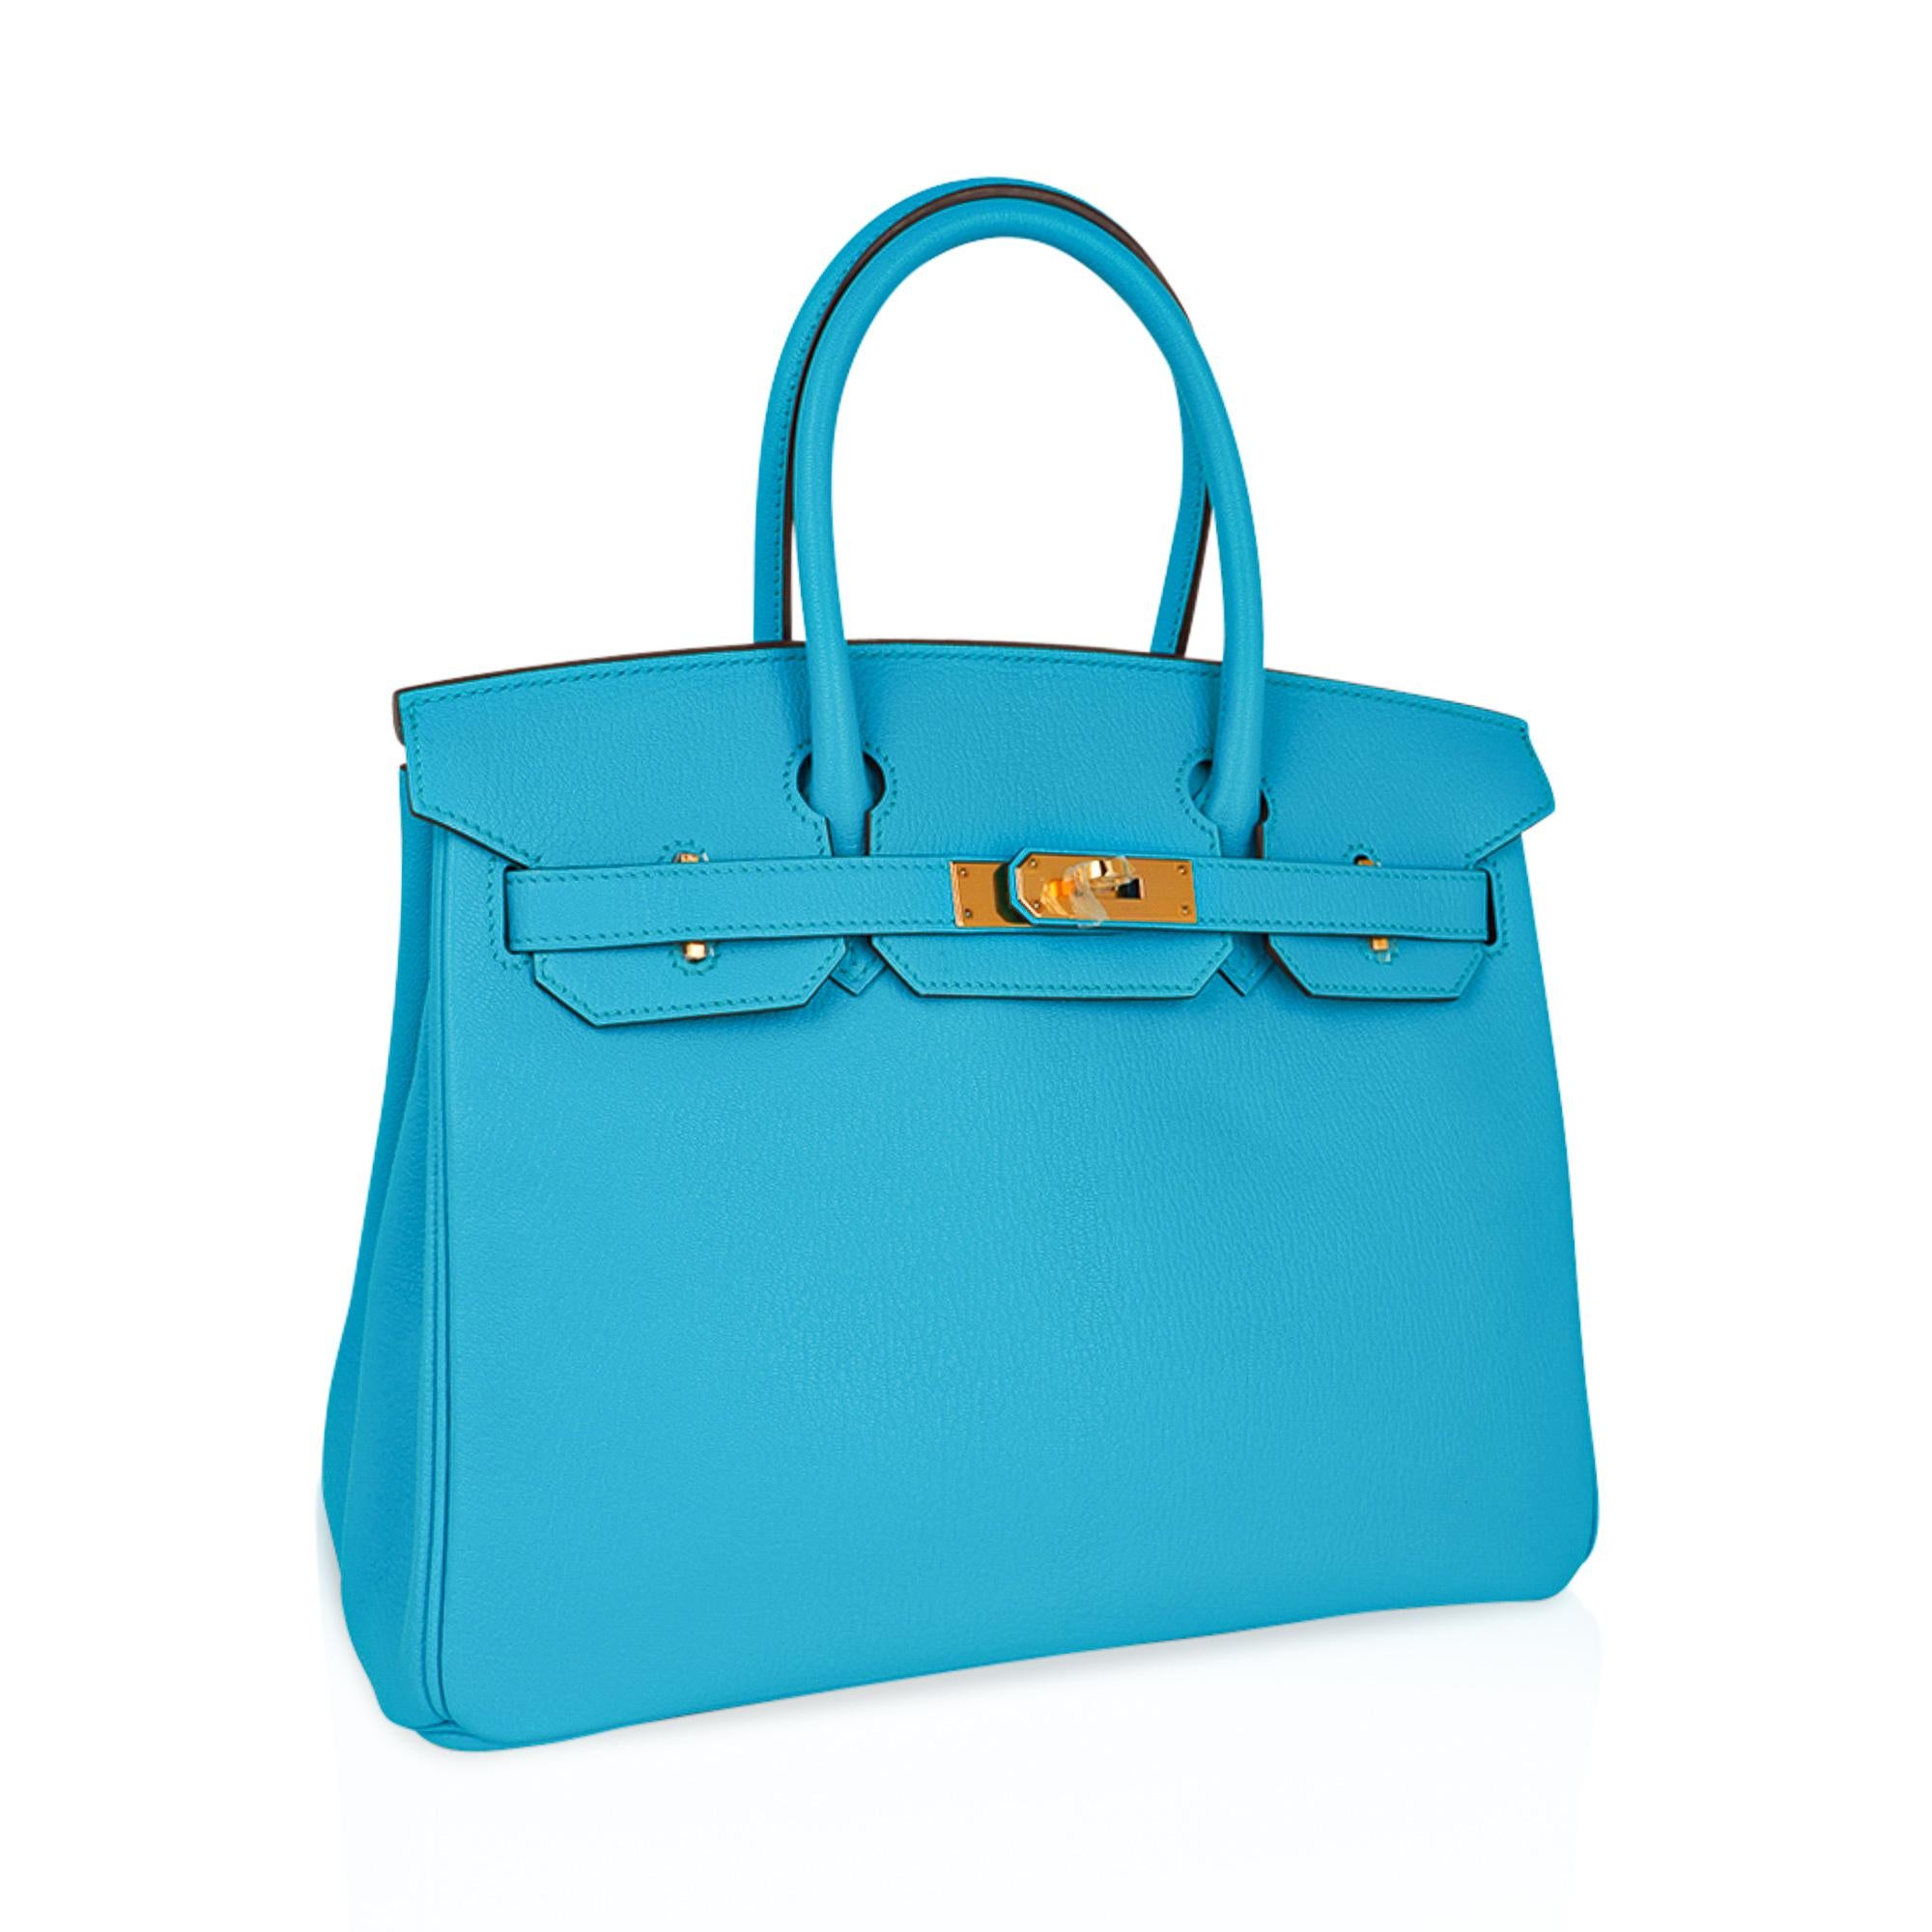 Mightychic offers an Hermes Birkin 30 bag featured in coveted Blue Aztec.
This stunning rare colour is considered to be among the most gorgeous of all Hermes Blue hues.
Chevre leather accentuates the beauty of Hermes colours.
Lush with gold